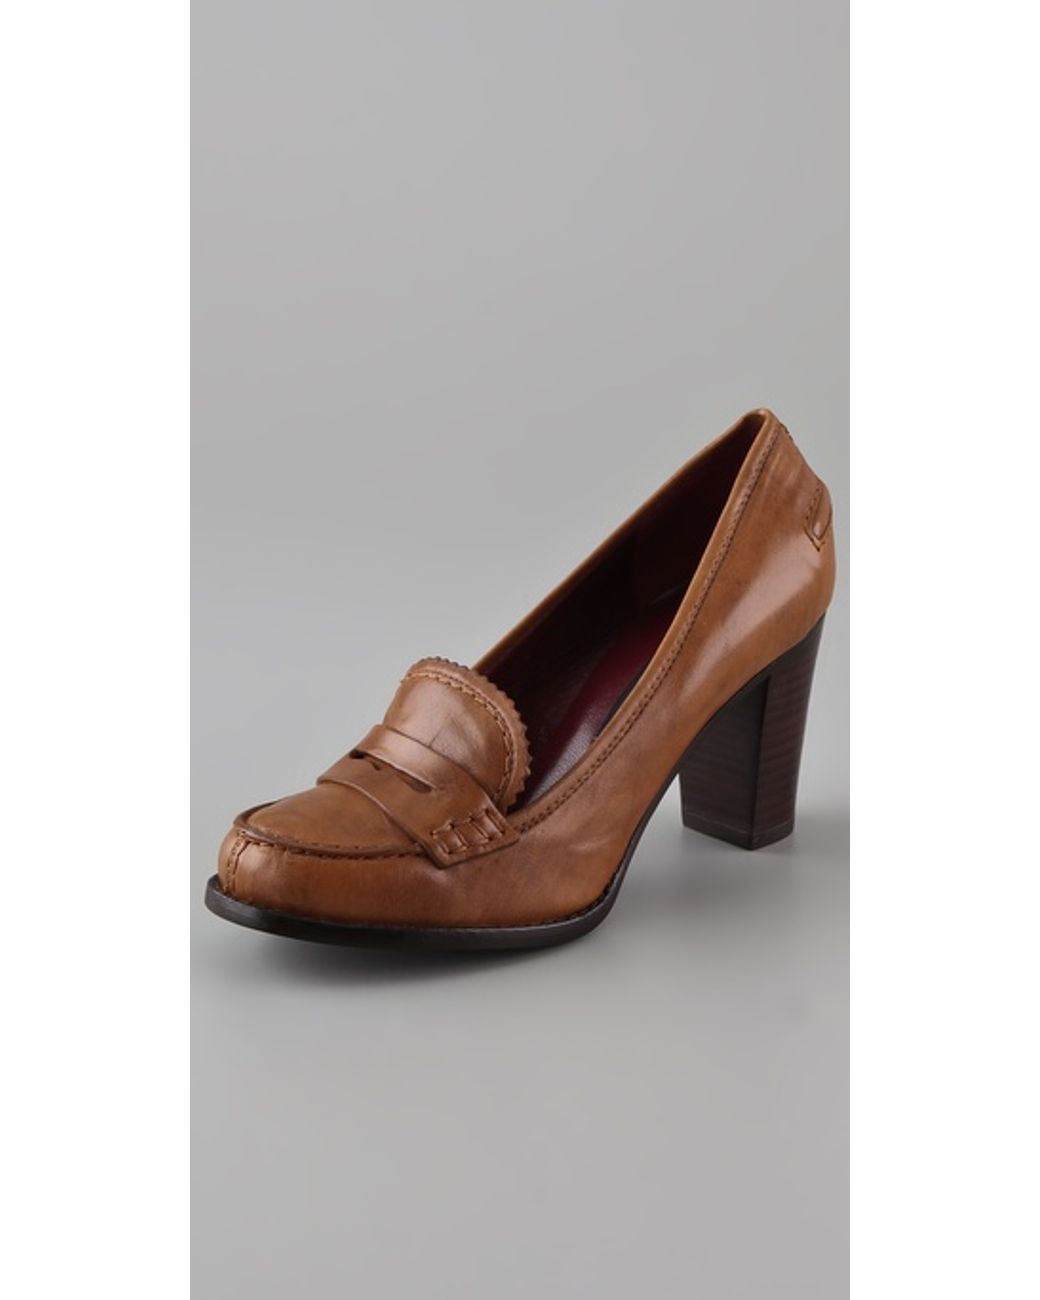 Share 73+ heeled loafers brown latest - hoangucantho.edu.vn